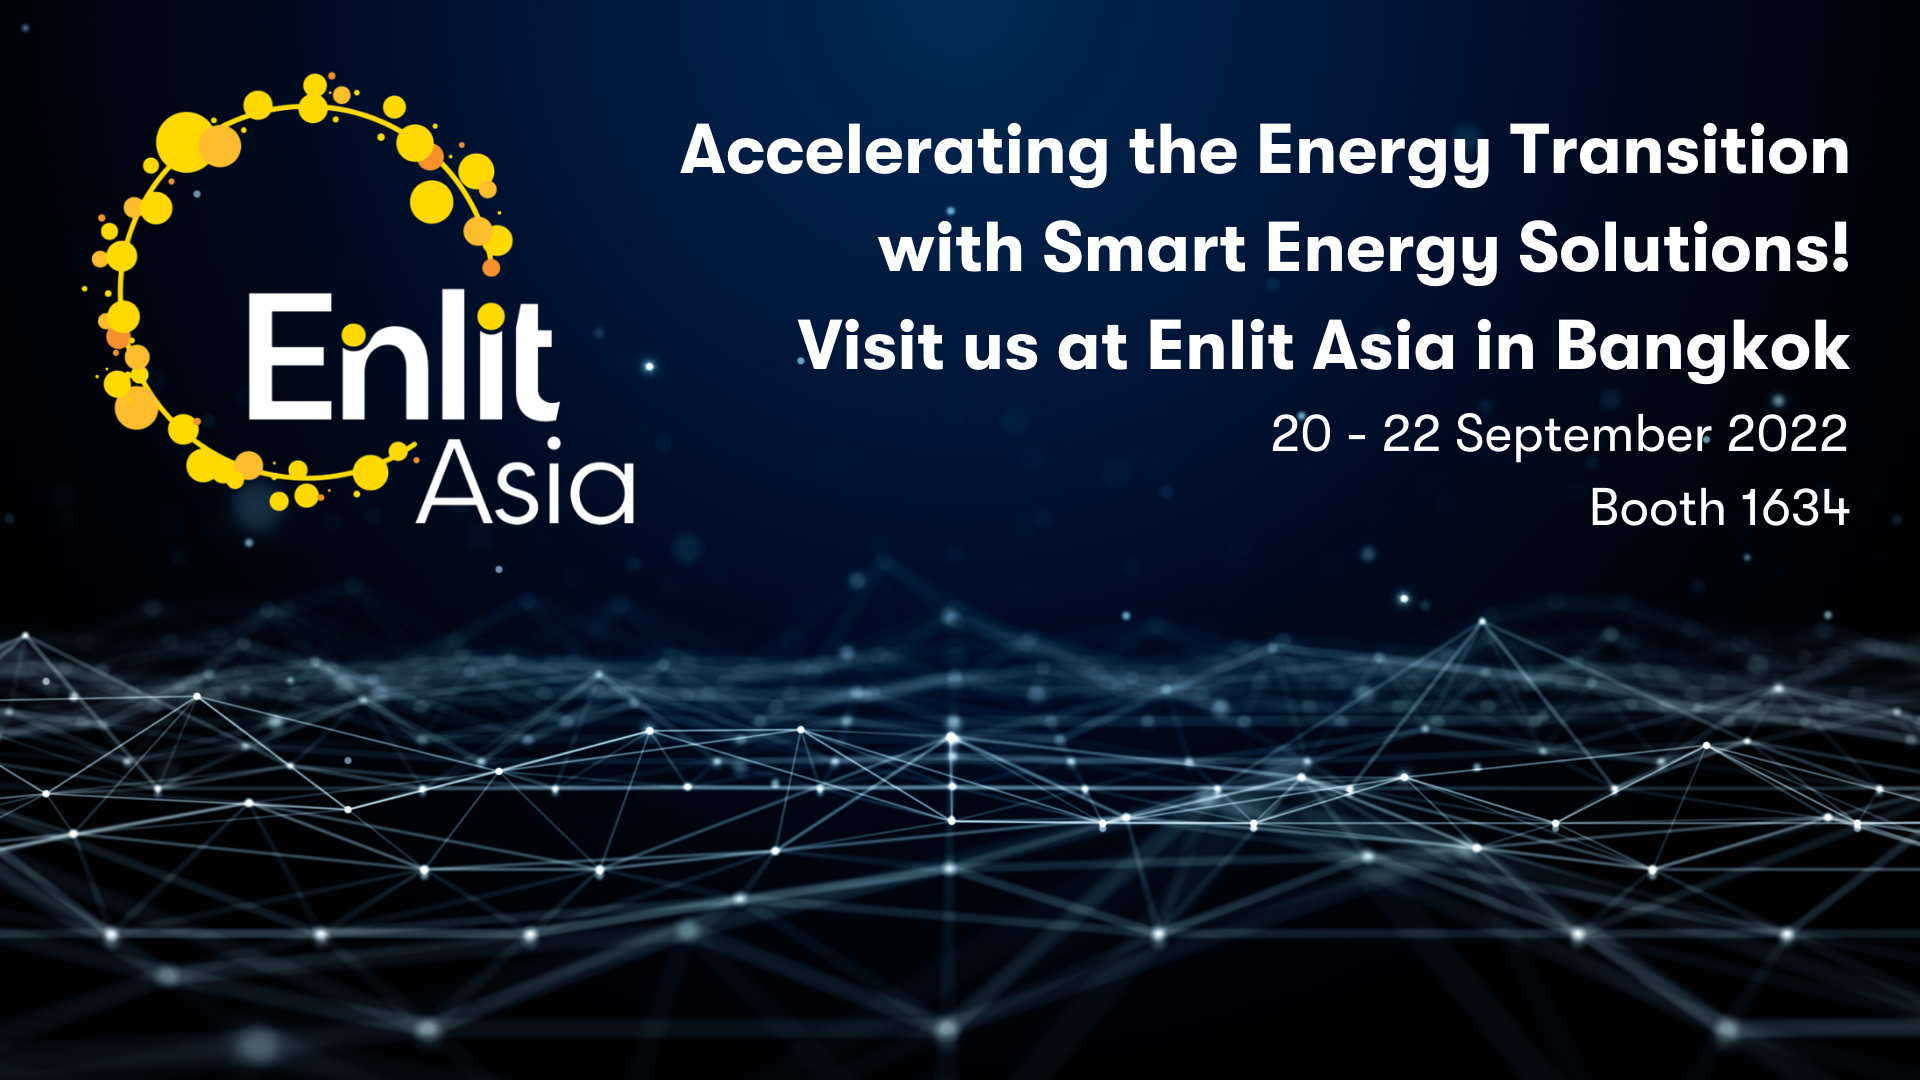 uploads/pics/https://www.steag-energyservices.com/uploads/pics/Accelerating_the_Energy_Transition_with_Smart_Digital_Solutions_Visit_us_at_Enlit_Asia_in_Bangkok__1__02.png